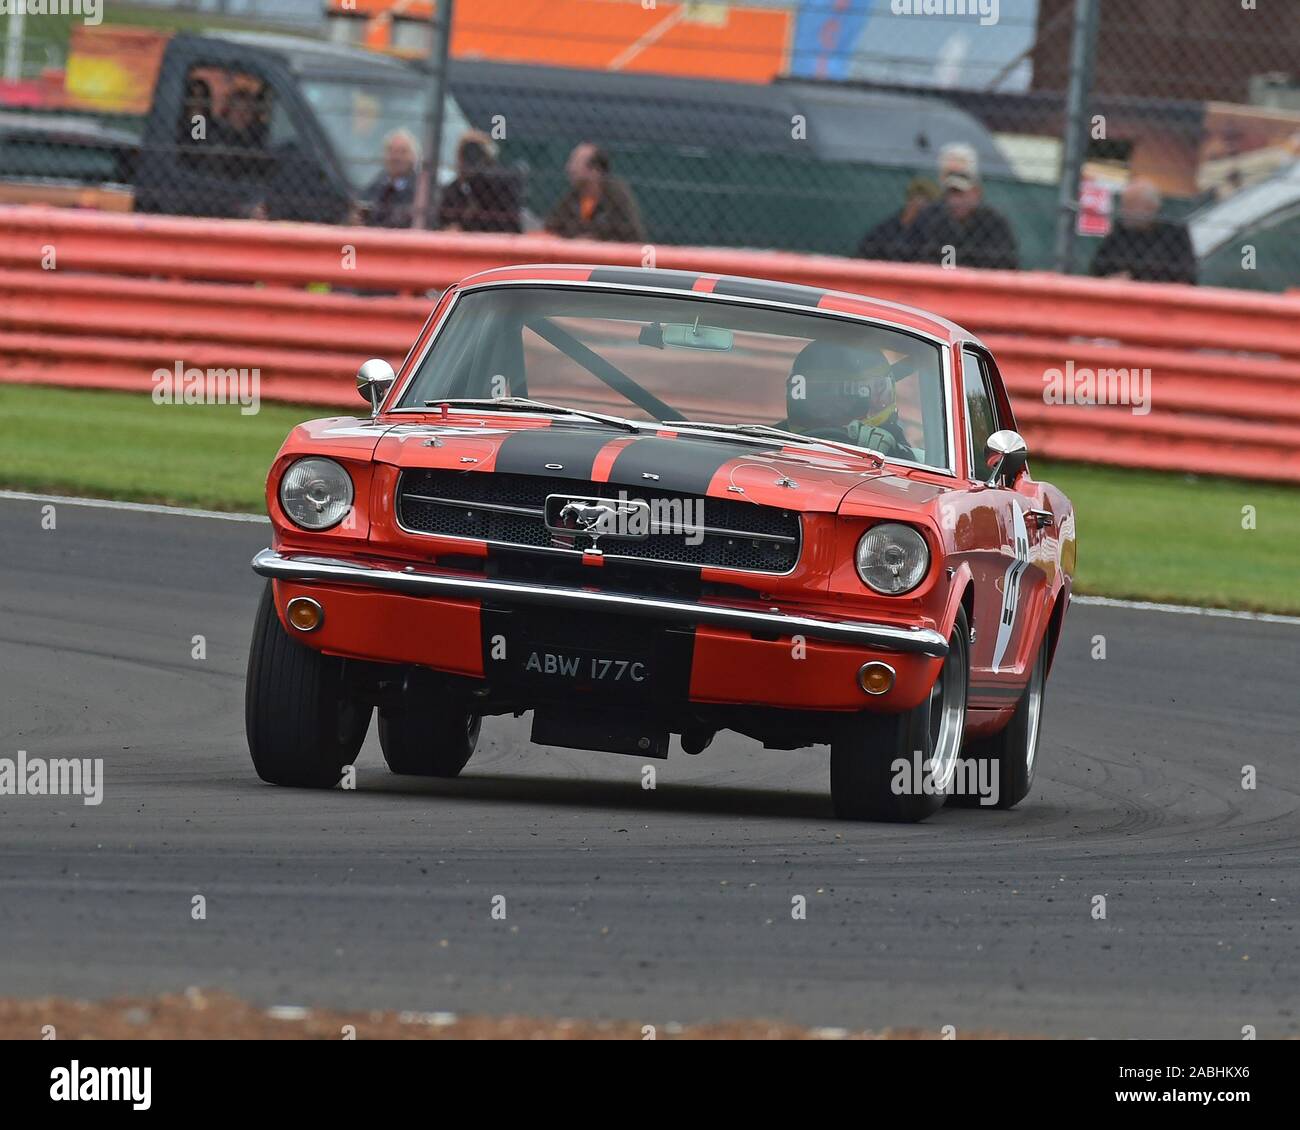 Colin Sowter, Ford Mustang, Transatlantic Trophy for Pre '66 Touring Cars, Silverstone Classic, July 2019, Silverstone, Northamptonshire, England, cir Stock Photo